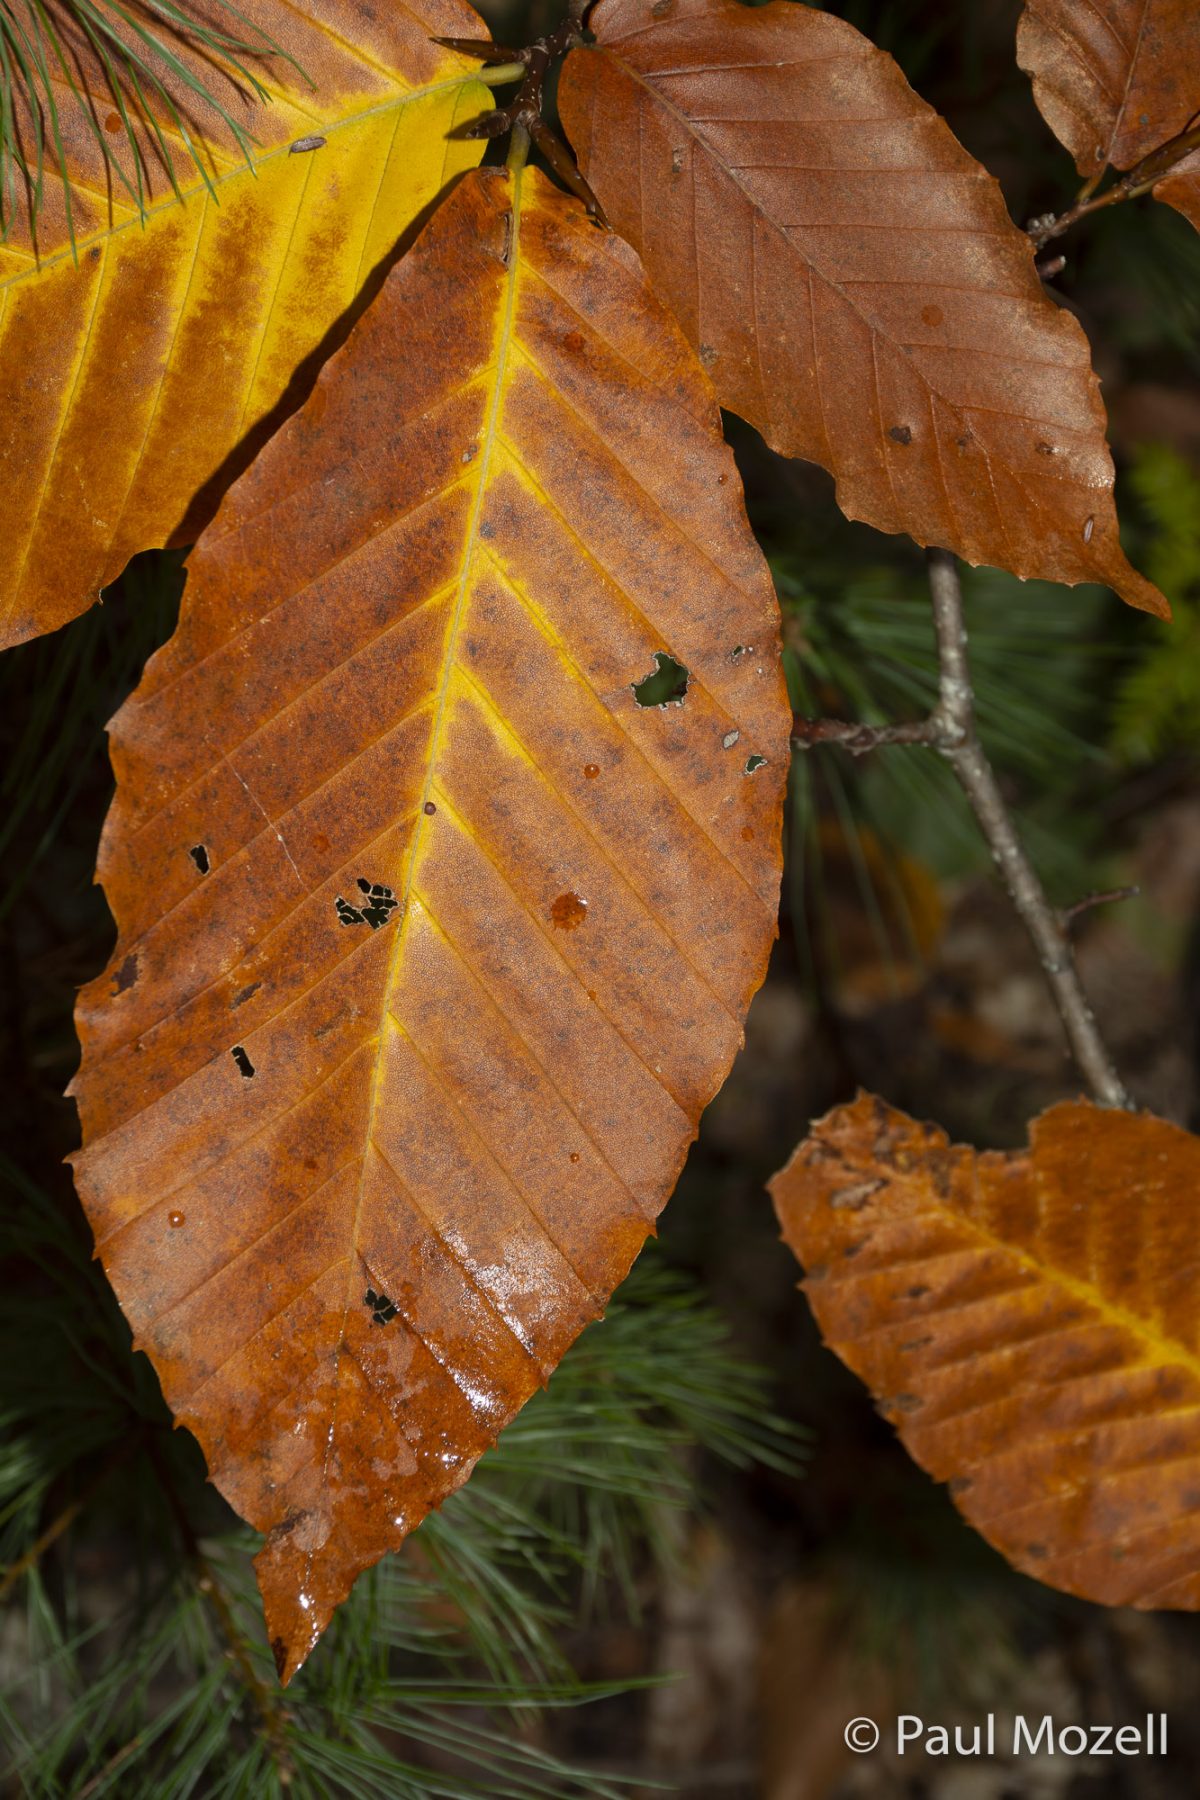 Beech leaves in autumn color.